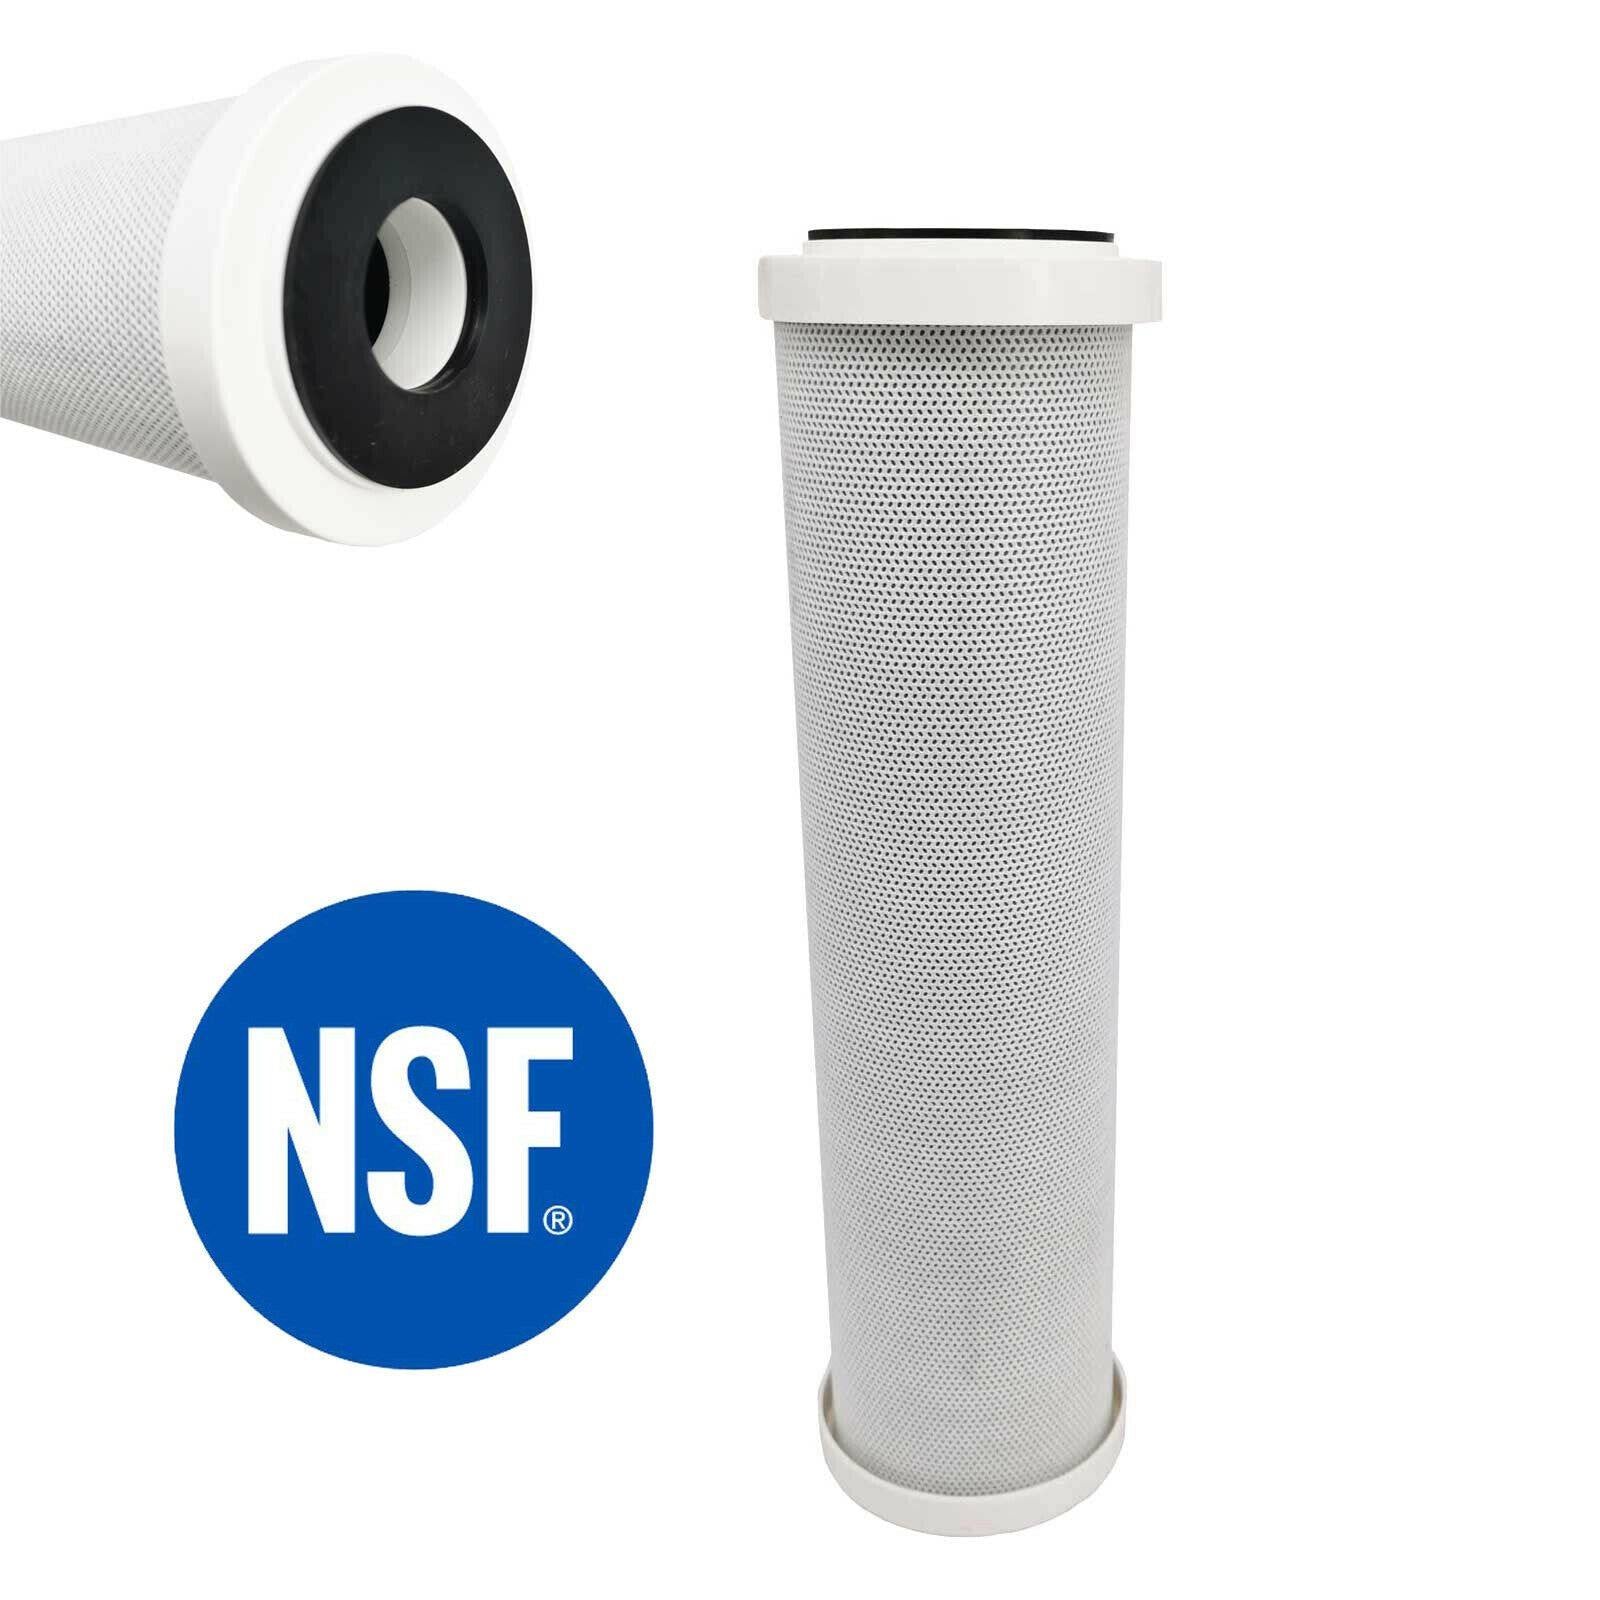 2X 0.5 Micron Carbon Water Filter Cartridges For Residential and Commercial Sparesbarn